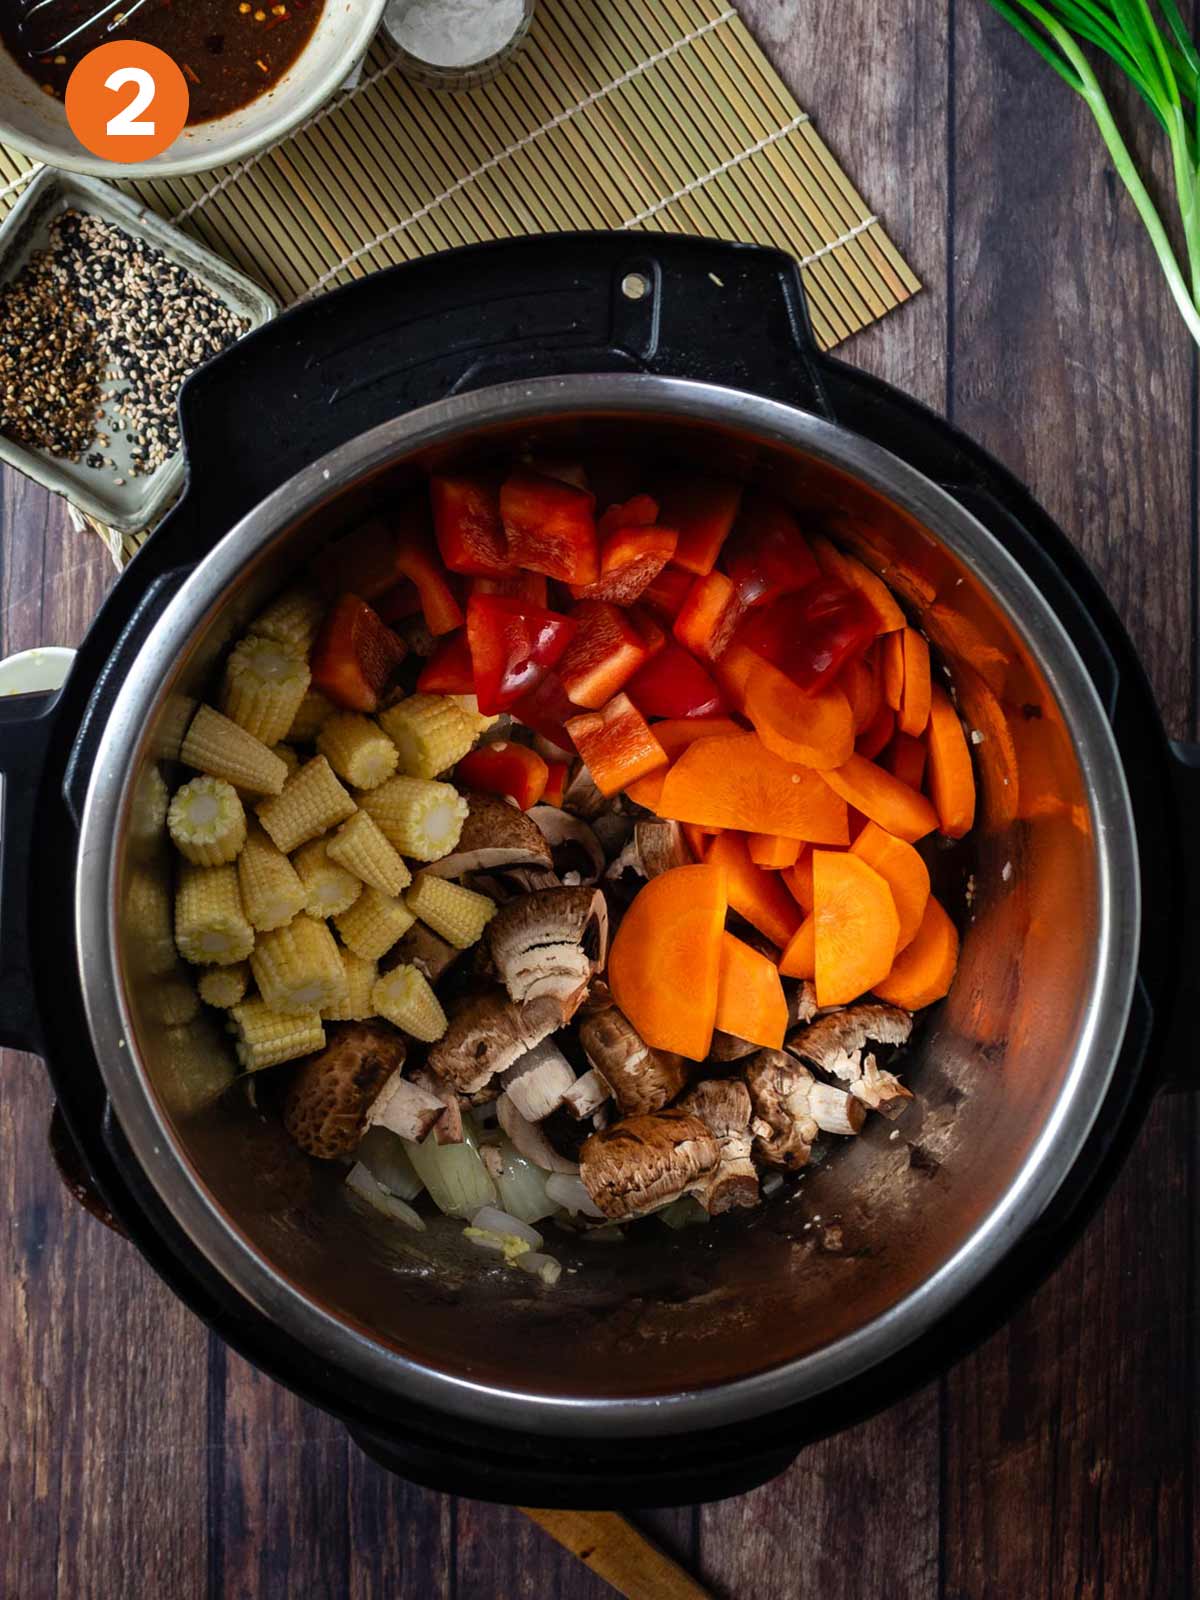 Carrots, bell pepper, corn, and mushrooms added to the instant pot.